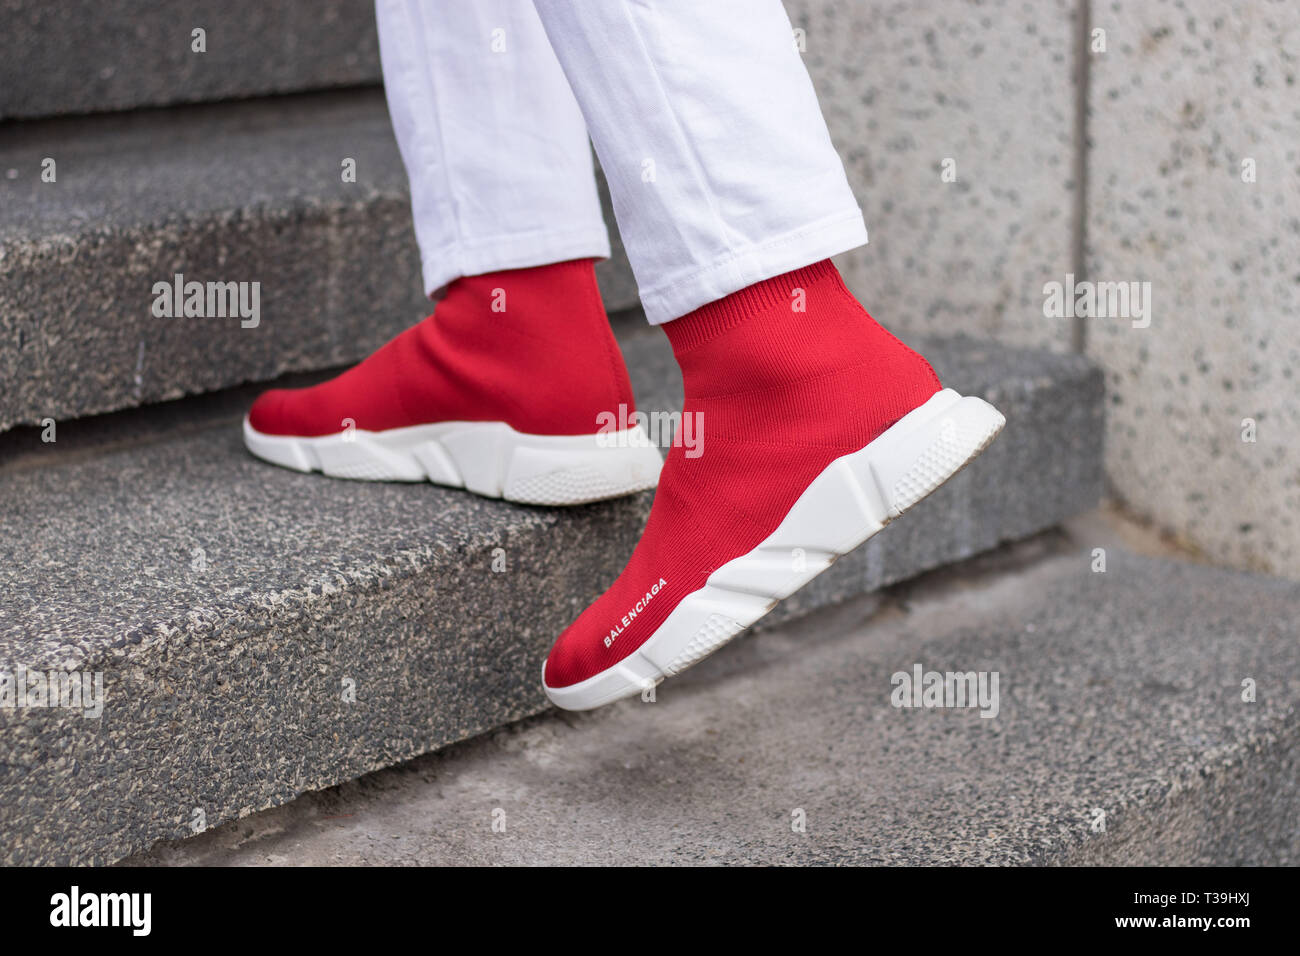 Cape Town, South Africa. 03 April 2019. Red and White Balenciaga running  shoes Stock Photo - Alamy